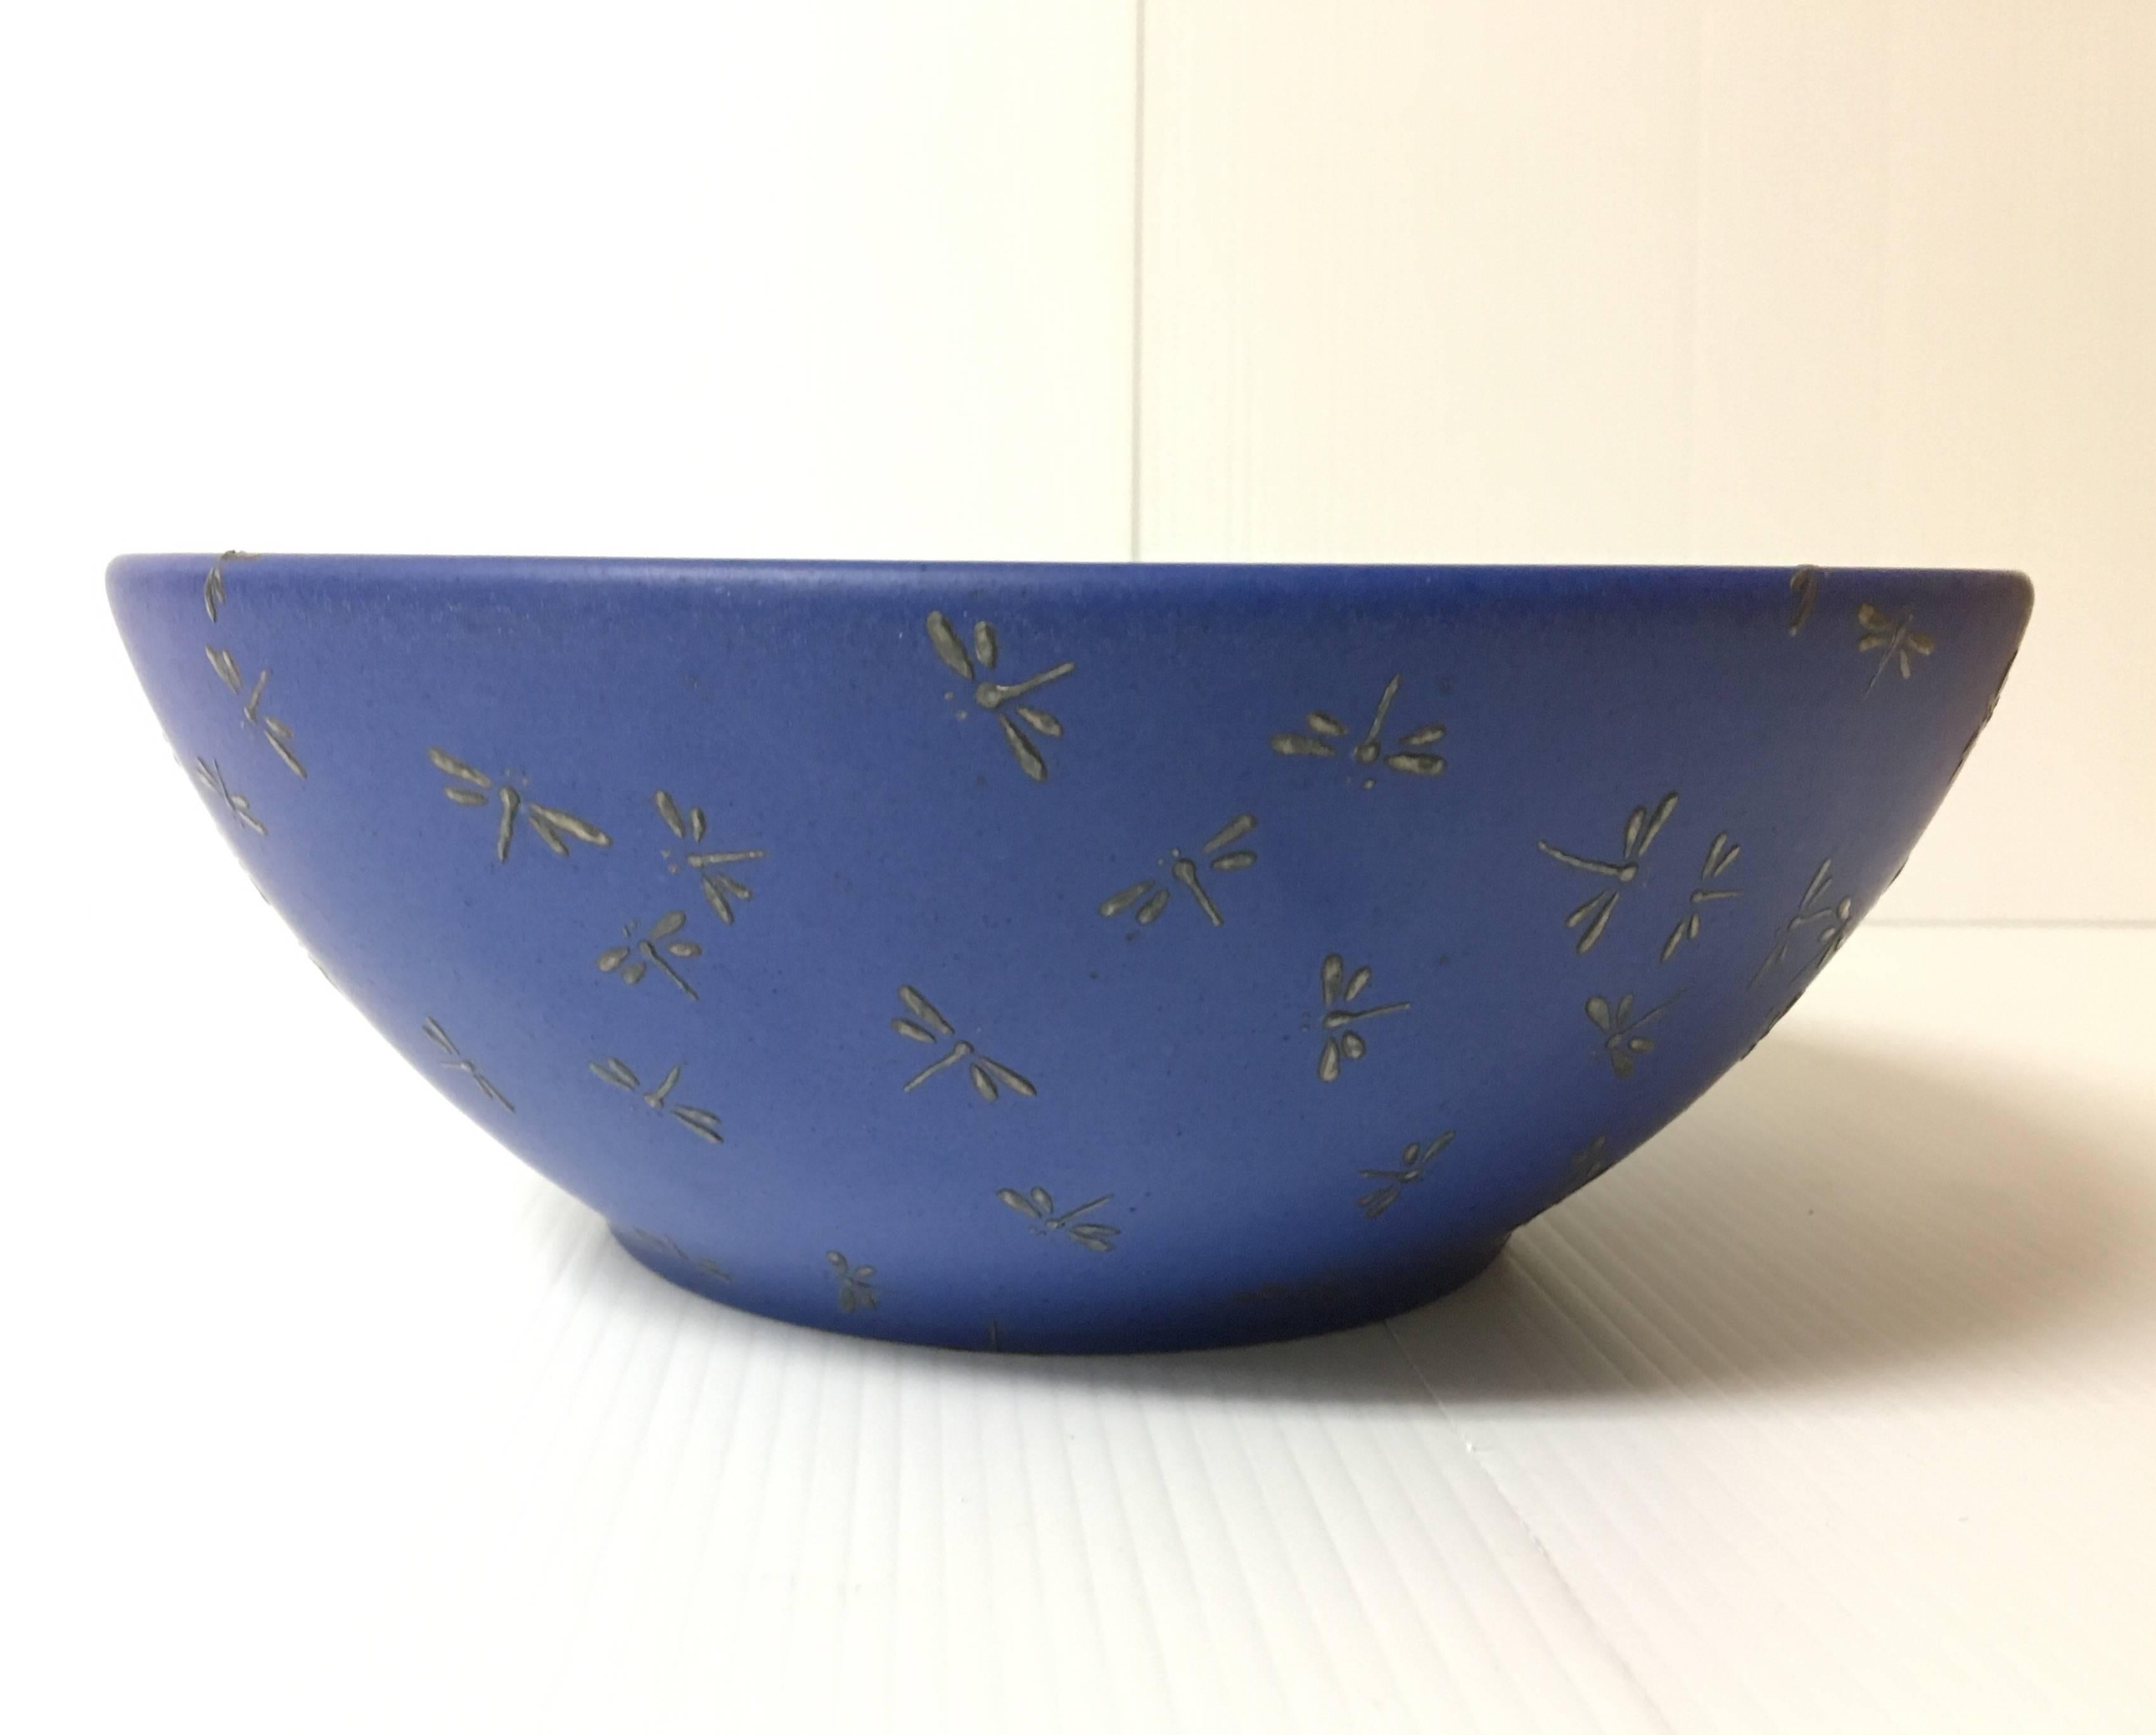 Well done ceramic bowl designed by Emilia Castillo for Los Castillo made in Mexico. Pure silver dragonfly motif incrustations on a cobalt ceramic bowl (9.5" diameter). Signed at the bottom.